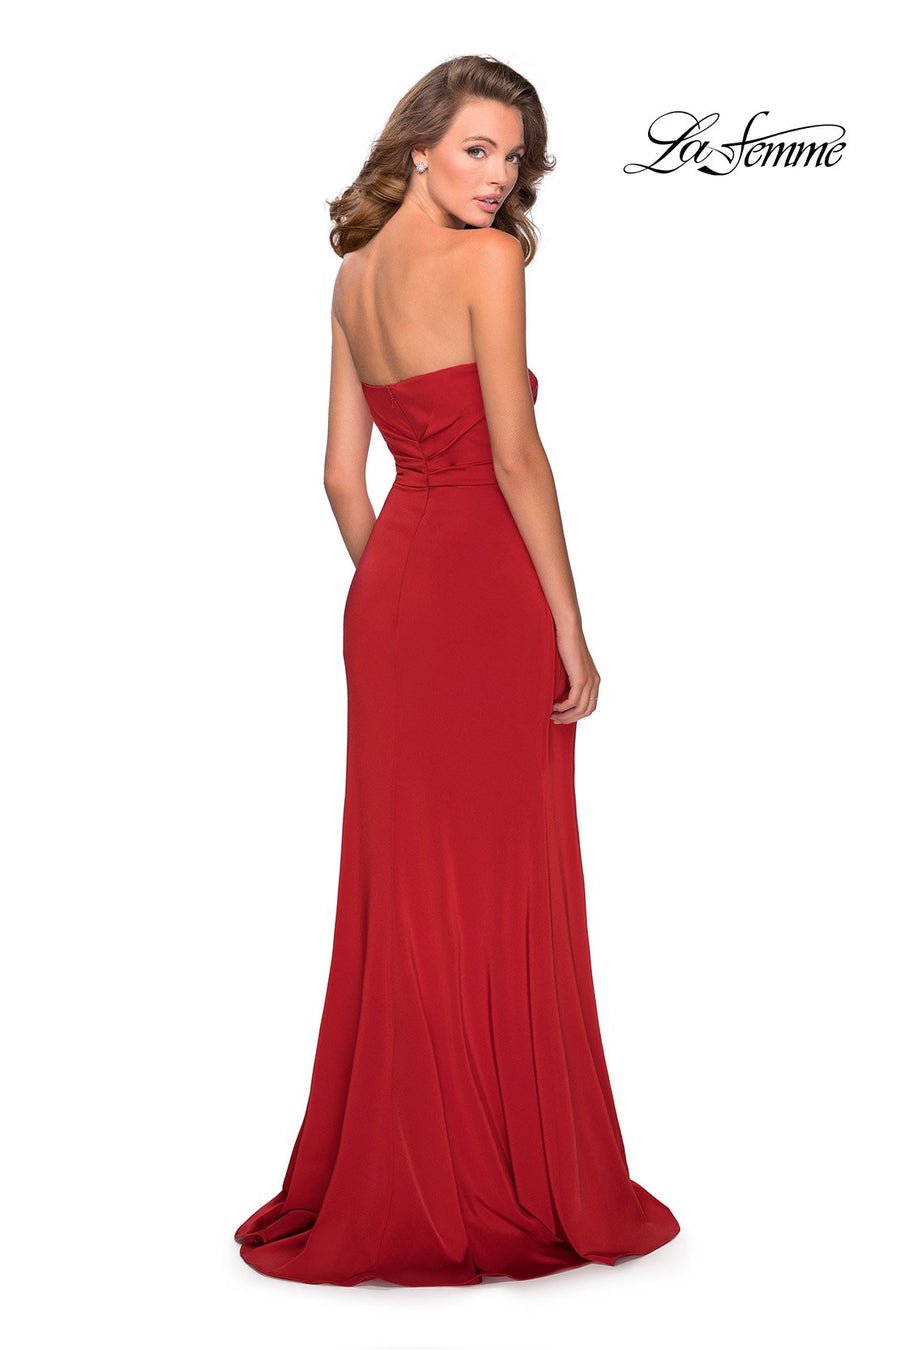 La Femme 28334 prom dress images.  La Femme 28334 is available in these colors: Black, Emerald, Red, Royal Blue.